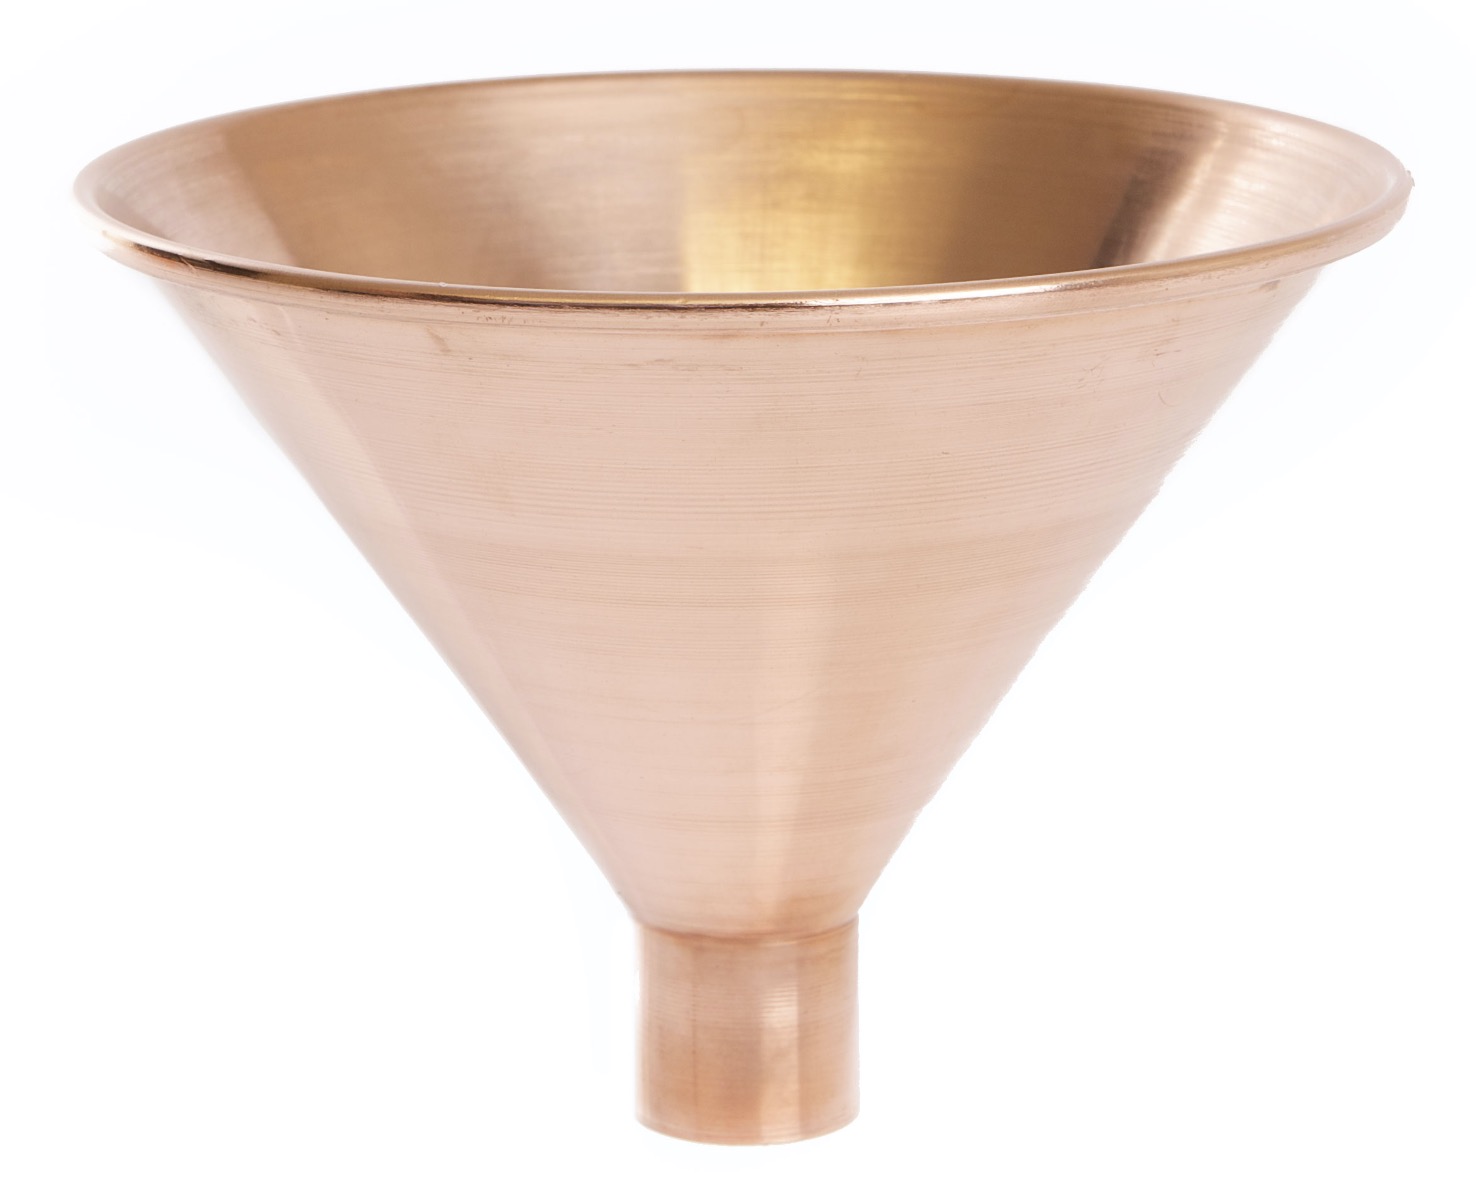 Round Copper Tundish with 54mm Dia.Plain Tail